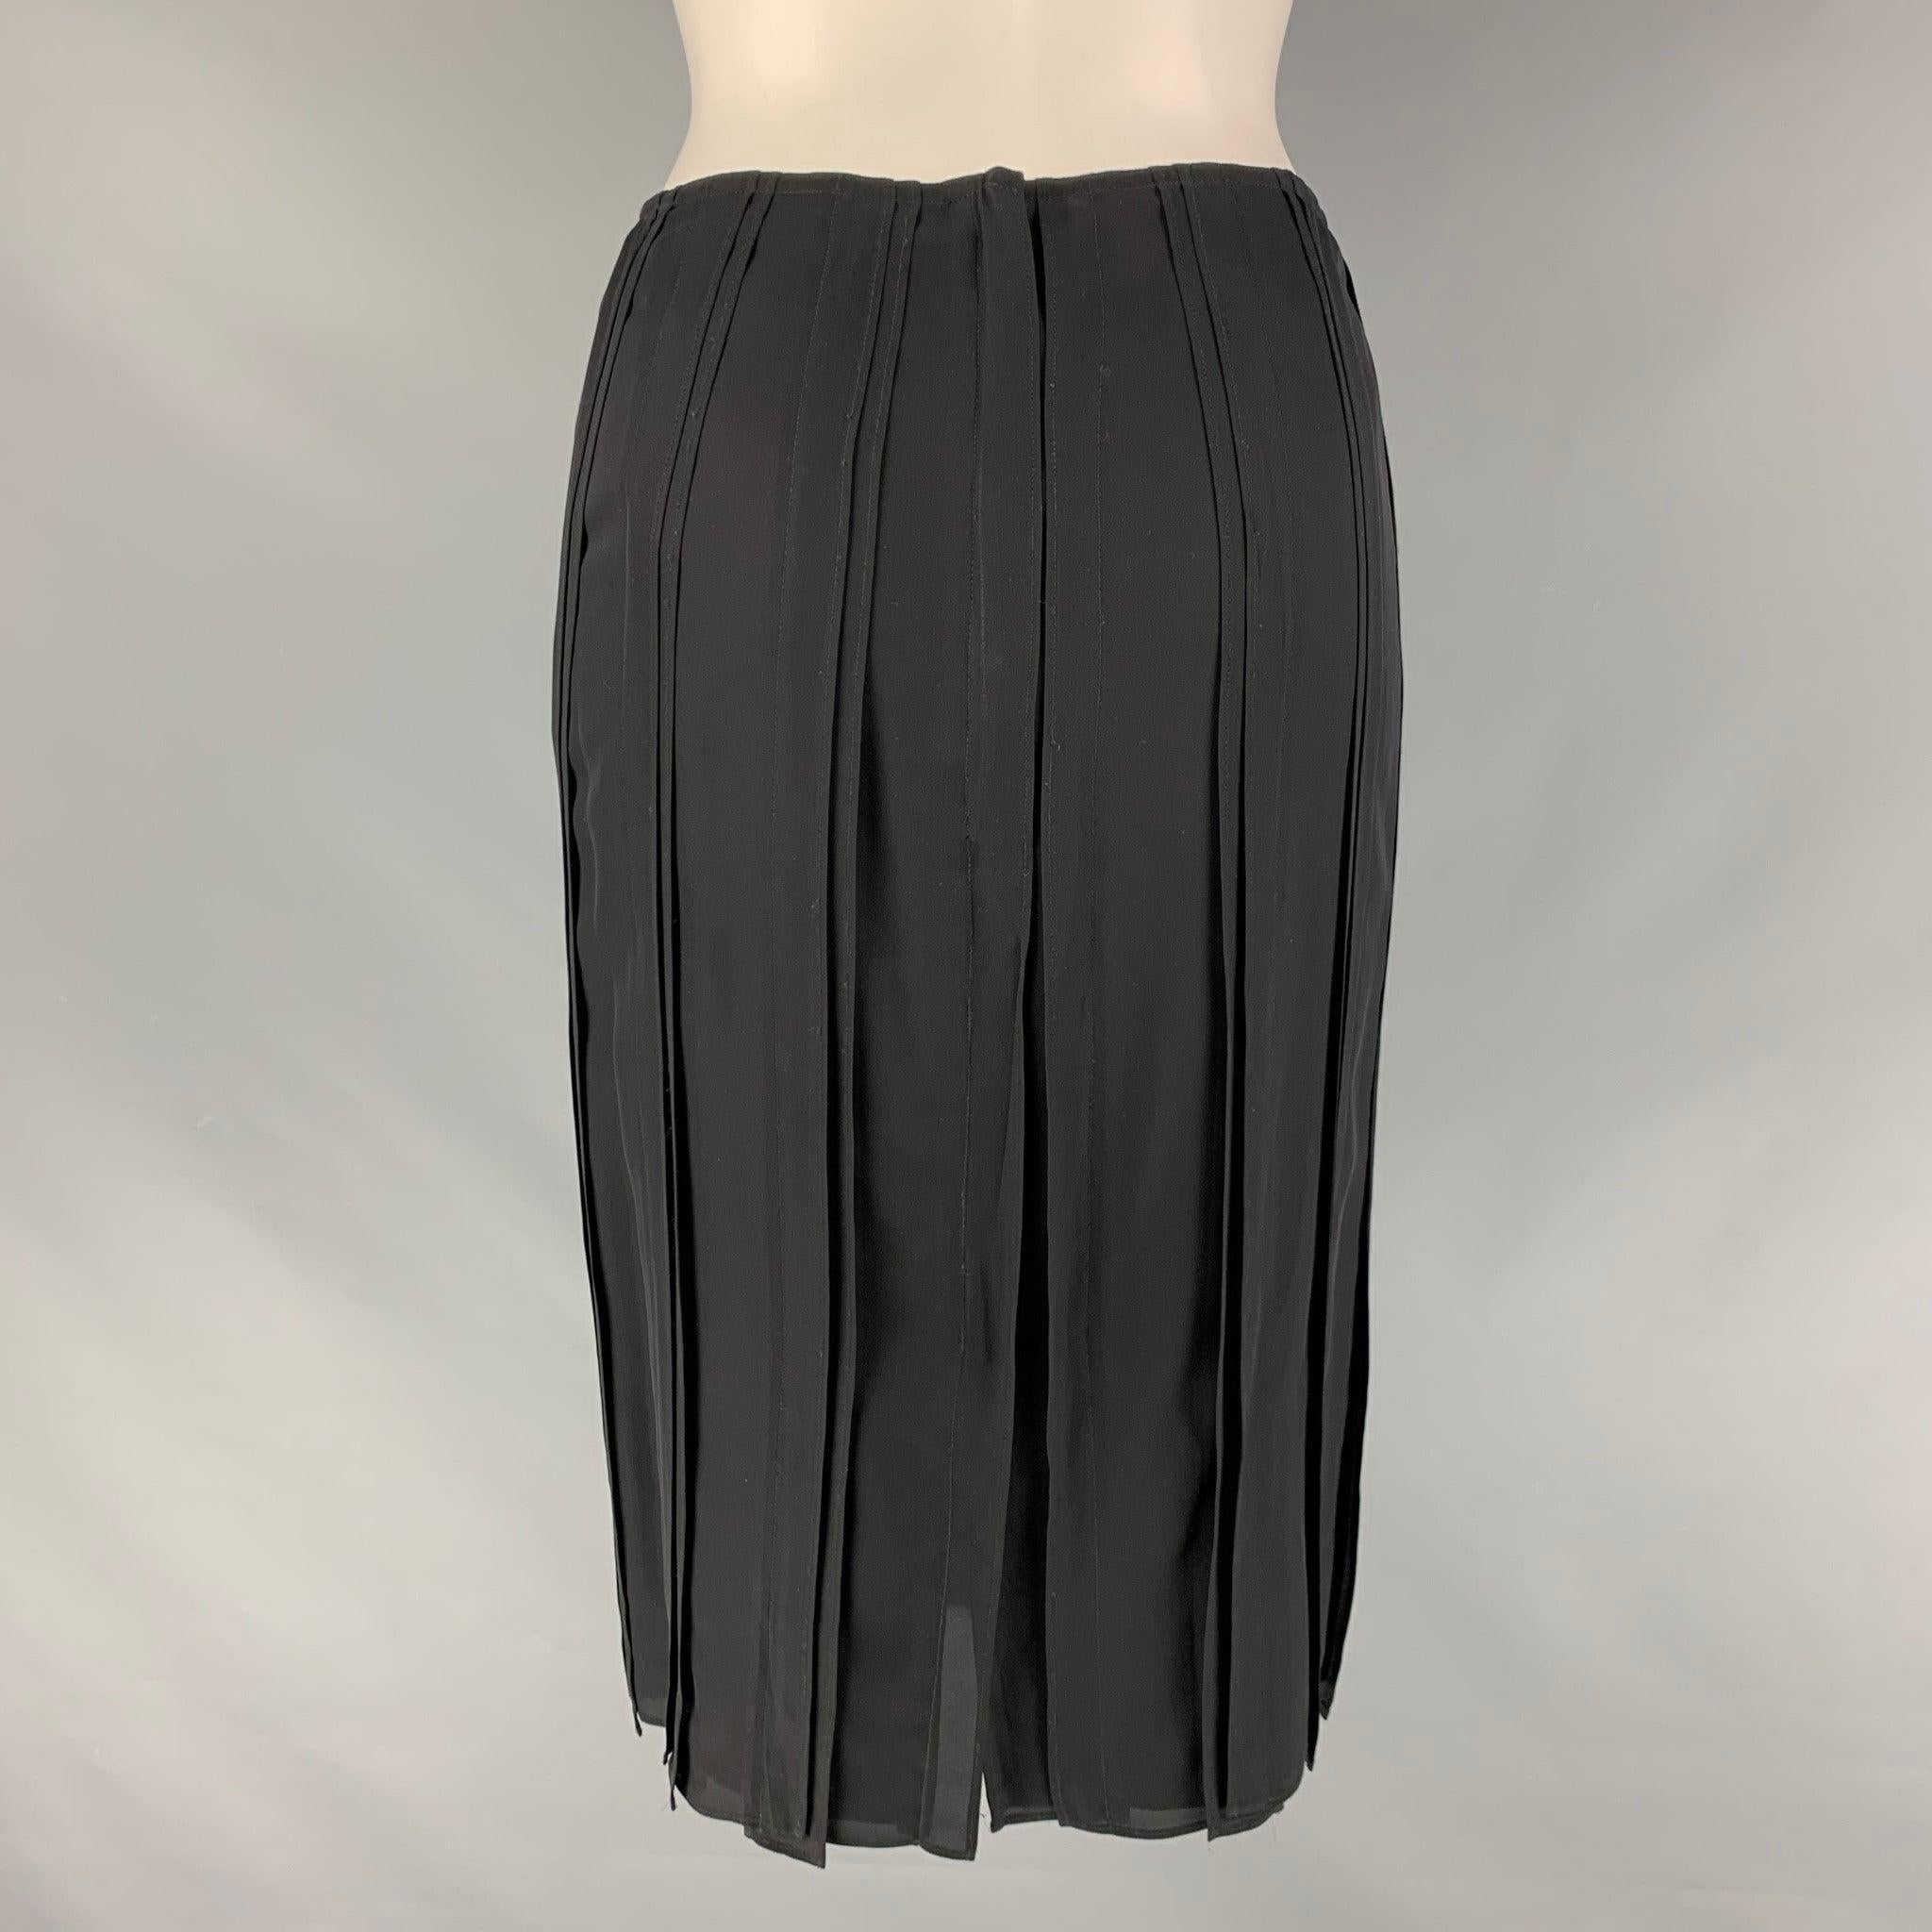 YVES SAINT LAURENT Size 4 Black Silk Pleated Pencil Skirt In Excellent Condition For Sale In San Francisco, CA